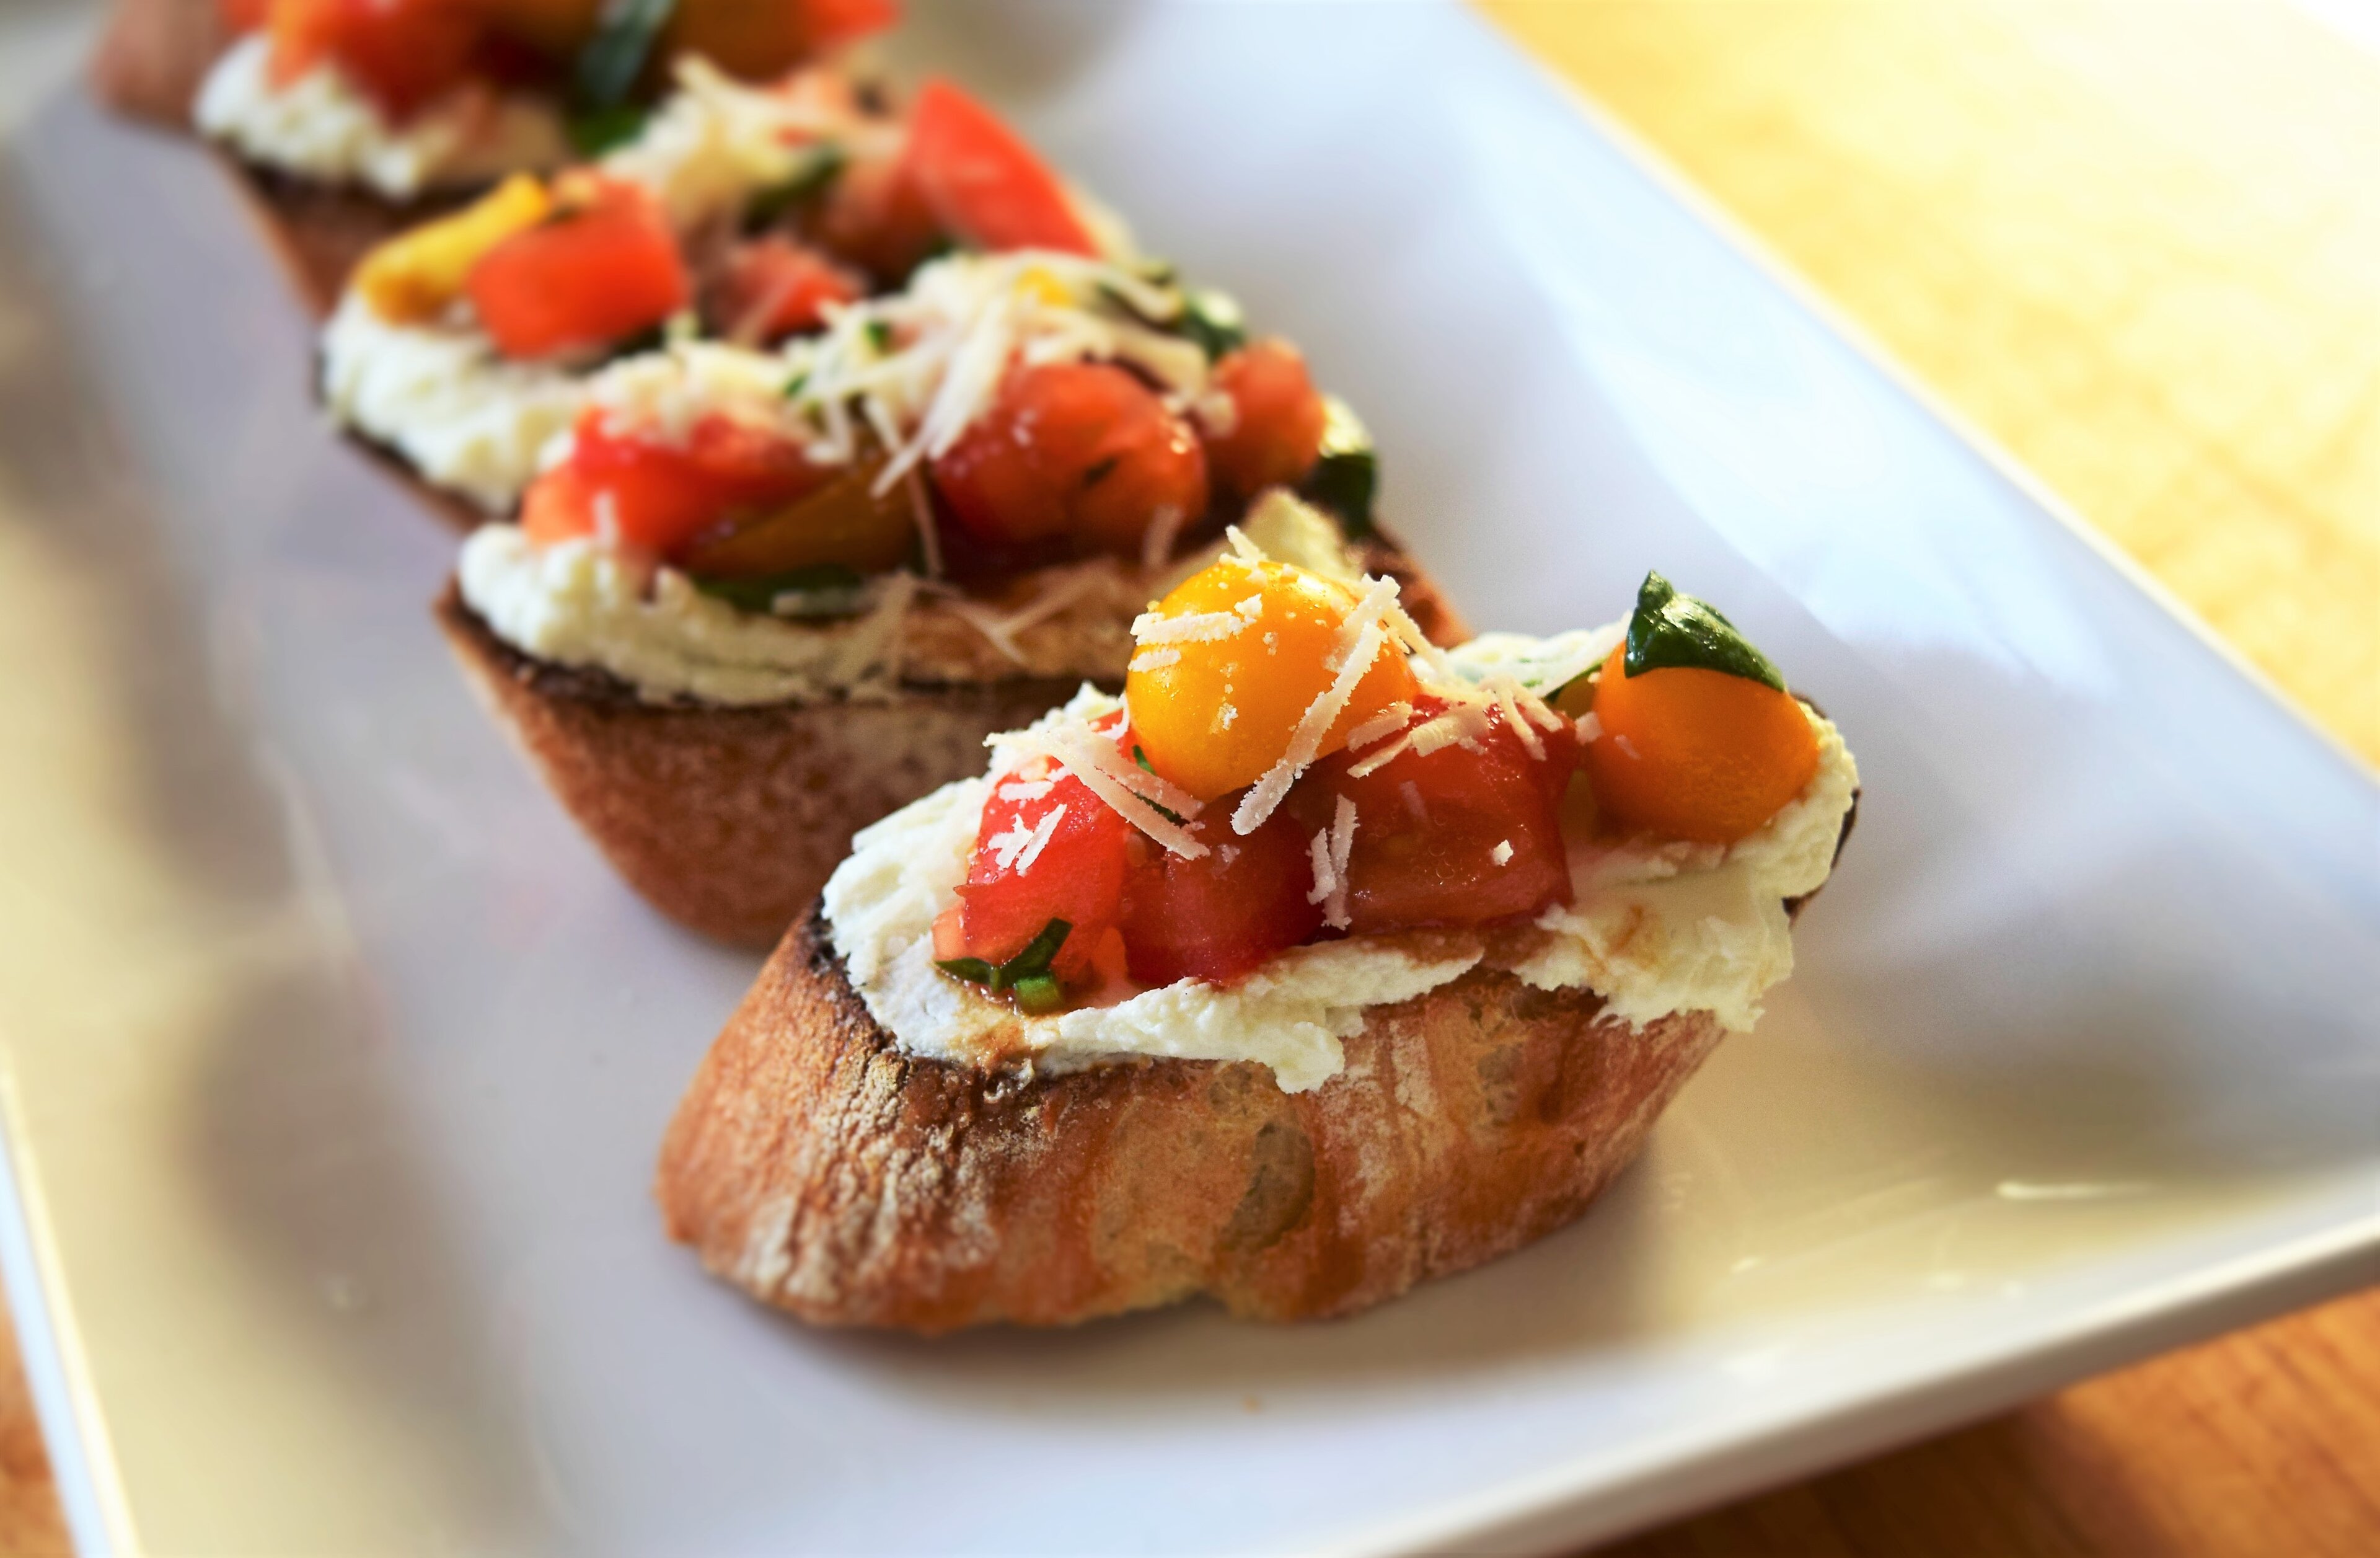 Tomato Basil Bruschetta with Goat Cheese | Easy on the Cook